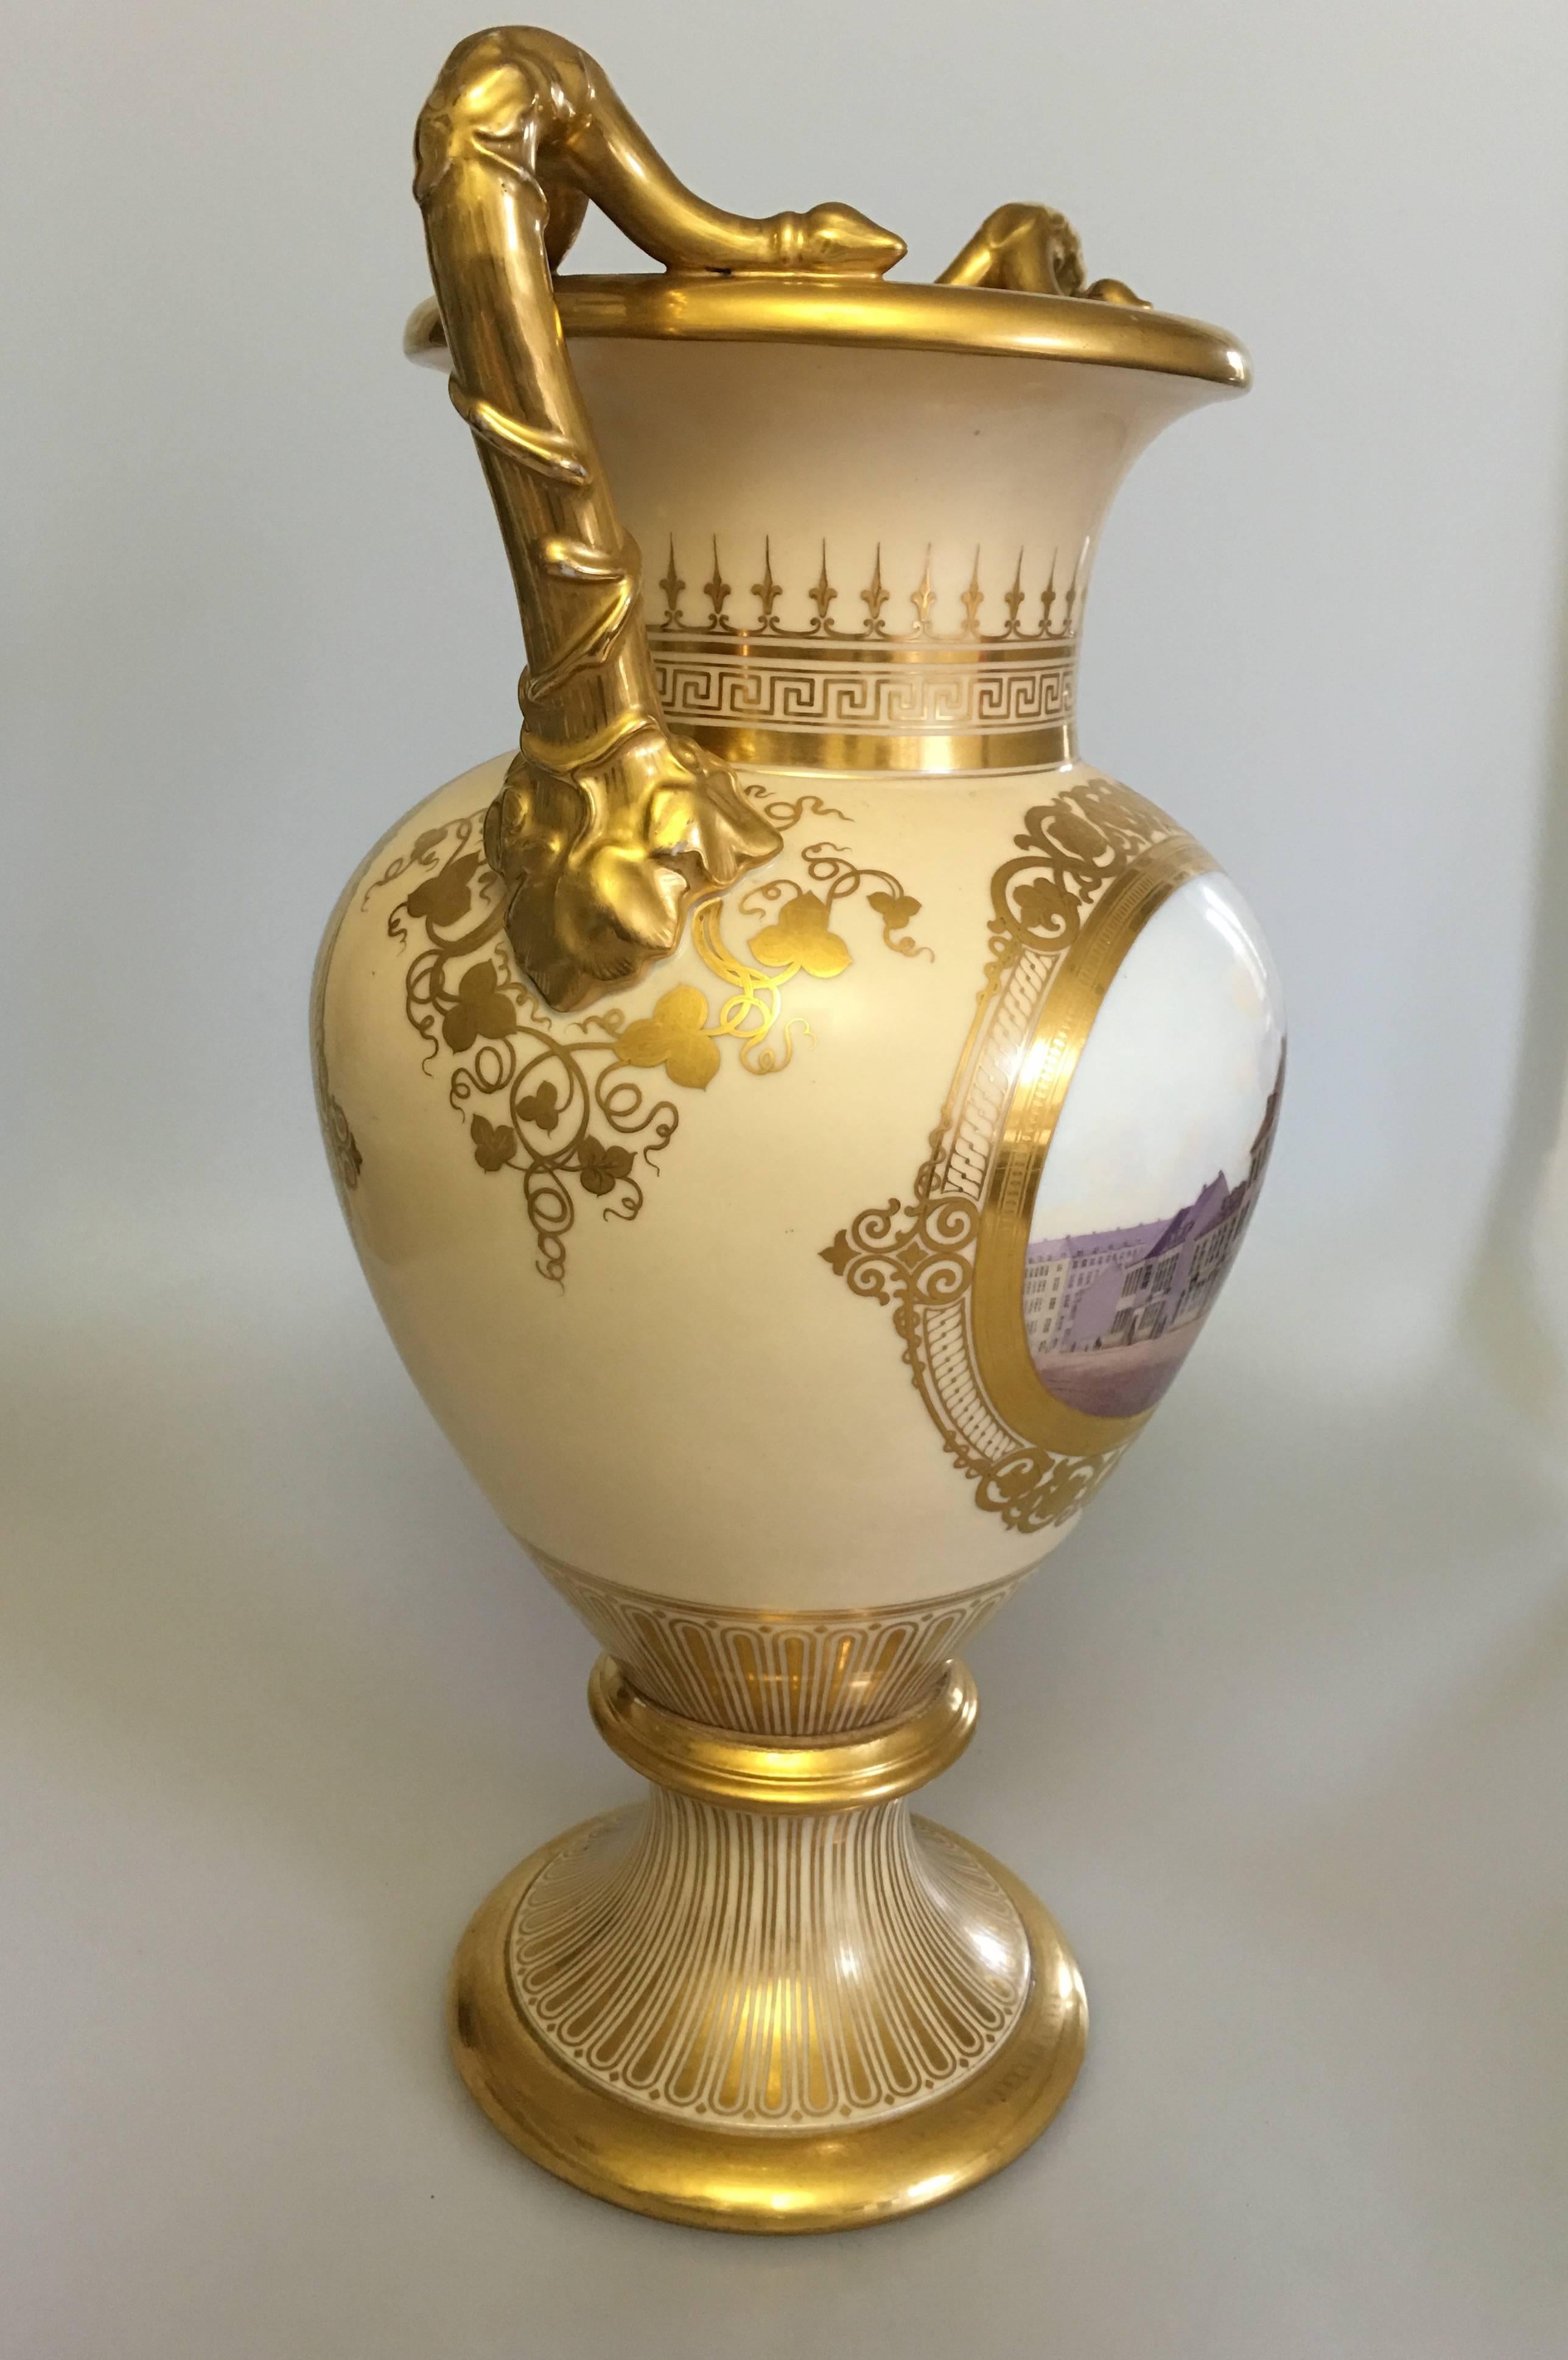 Large Bing & Grondahl Ornamental Two Handled Vase in Porcelain from around 1860-1880. With motifs of Copenhagen and the Danish Countryside flanked by gold patterns. 

